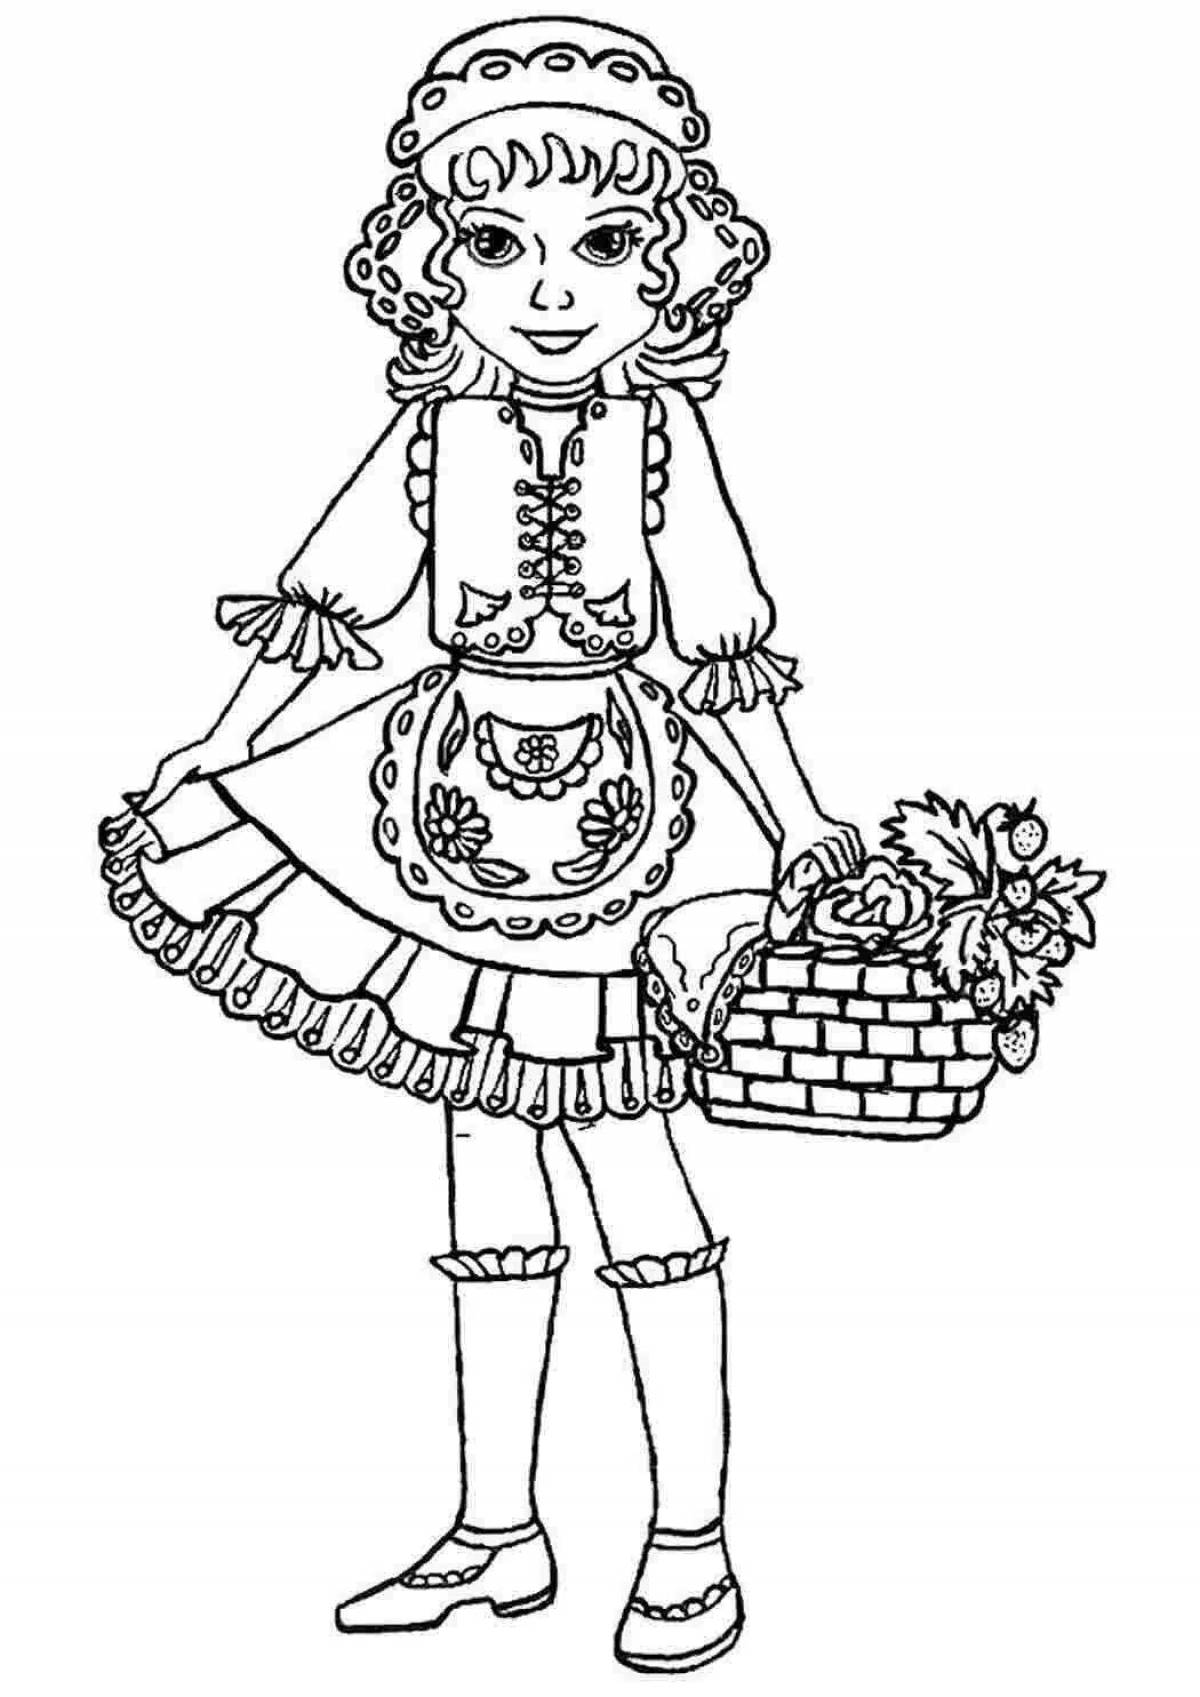 Coloring page exquisite carnival costume